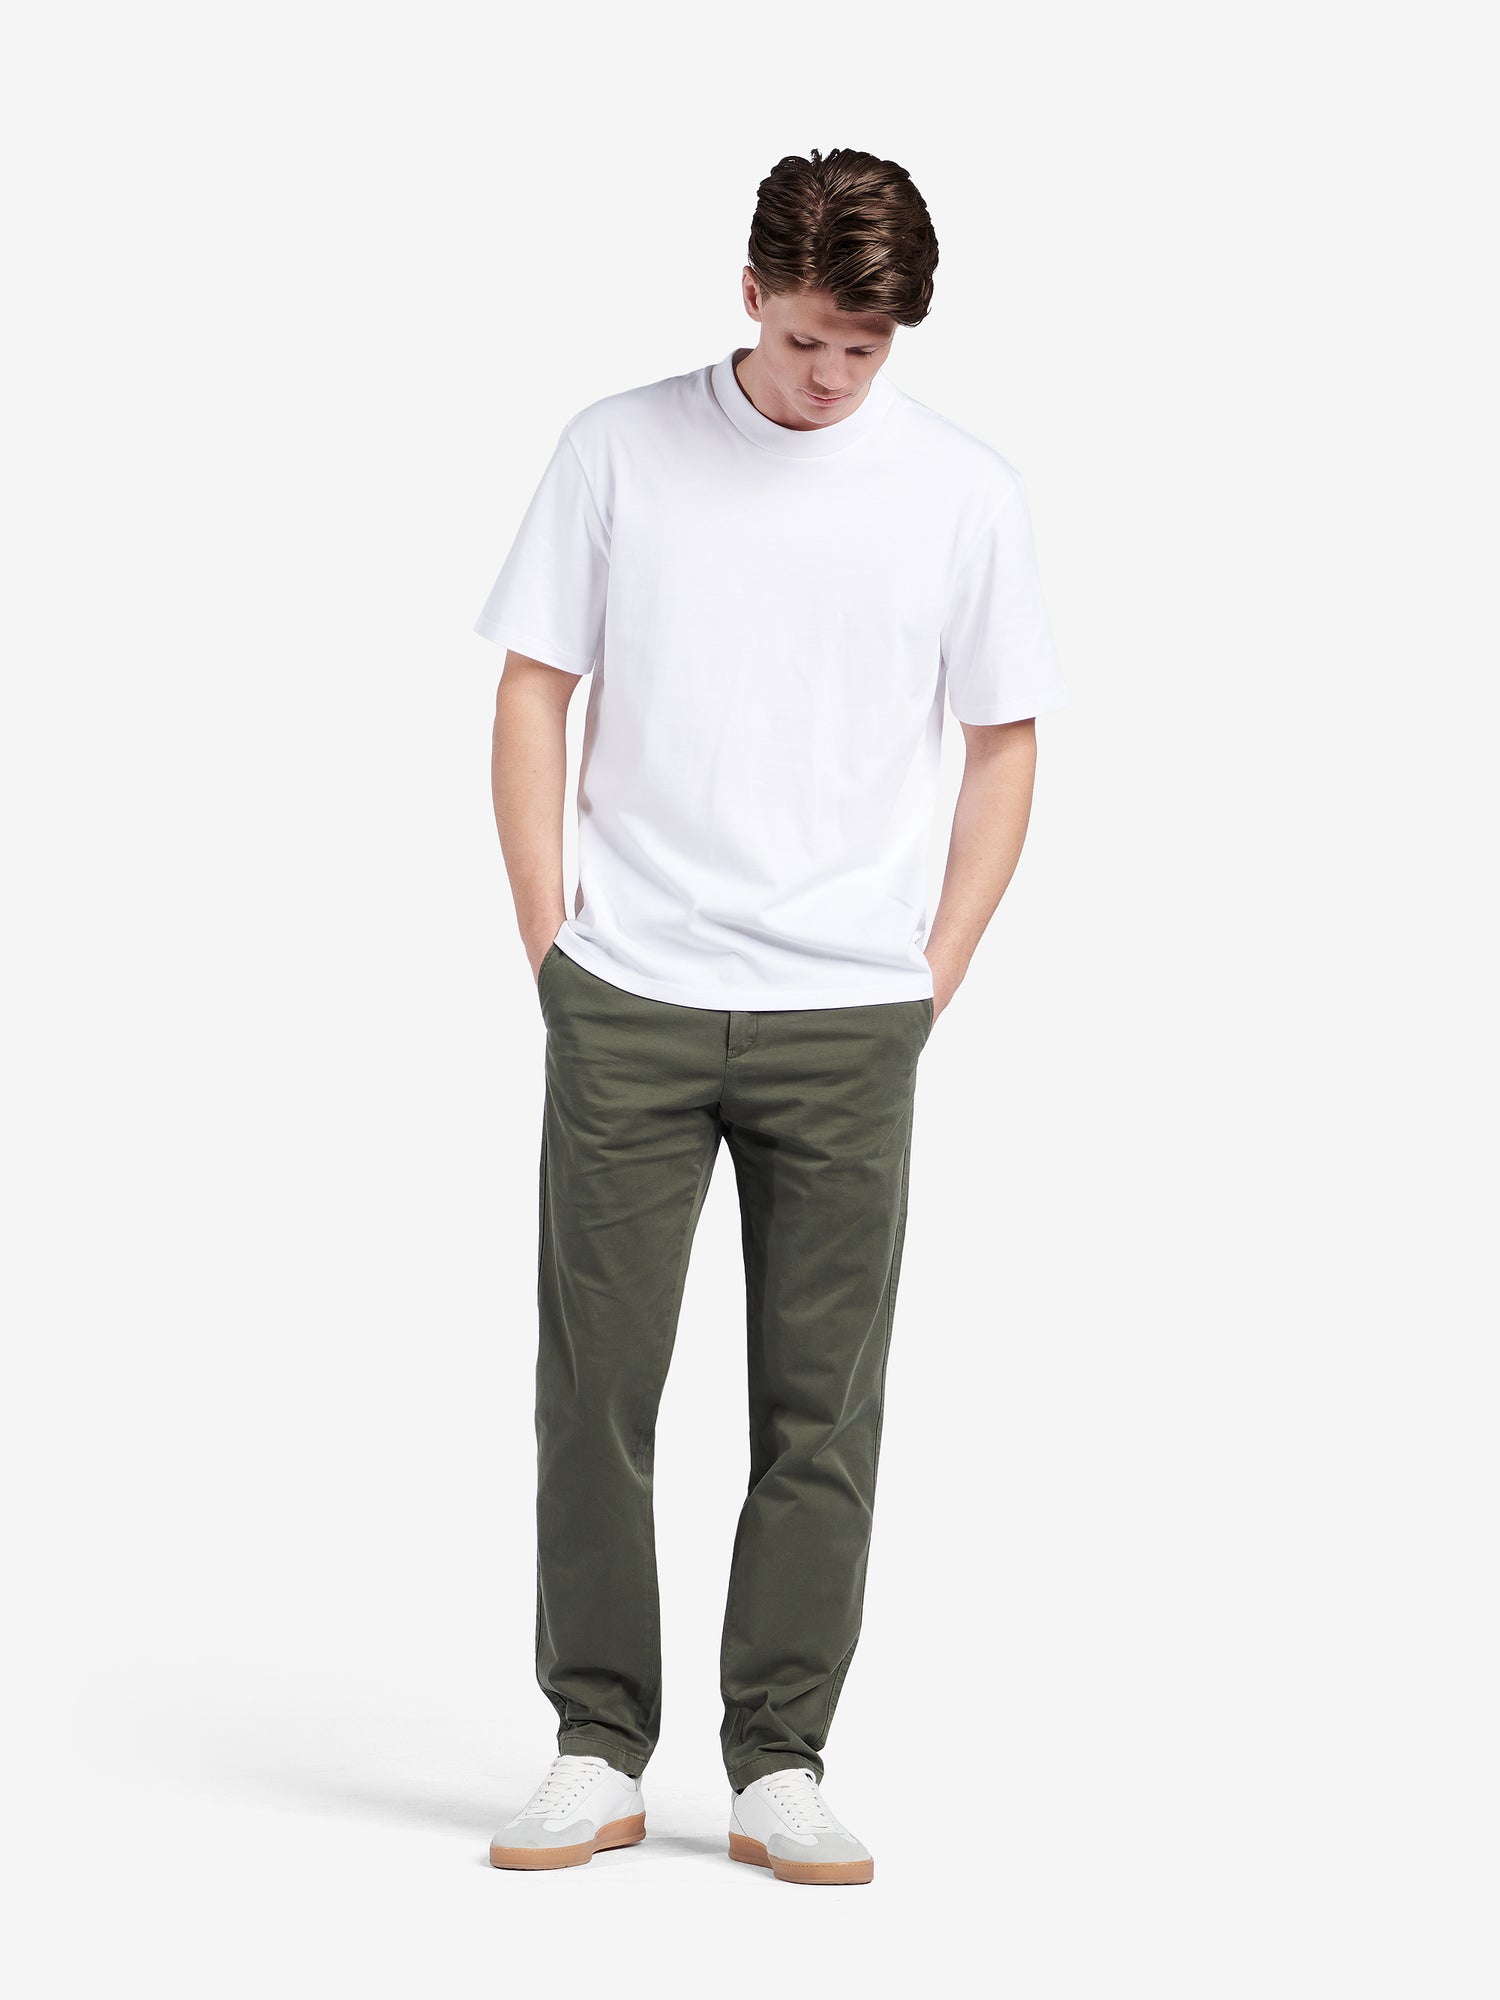 Diego Cotton-Stretch PA10097-DGN